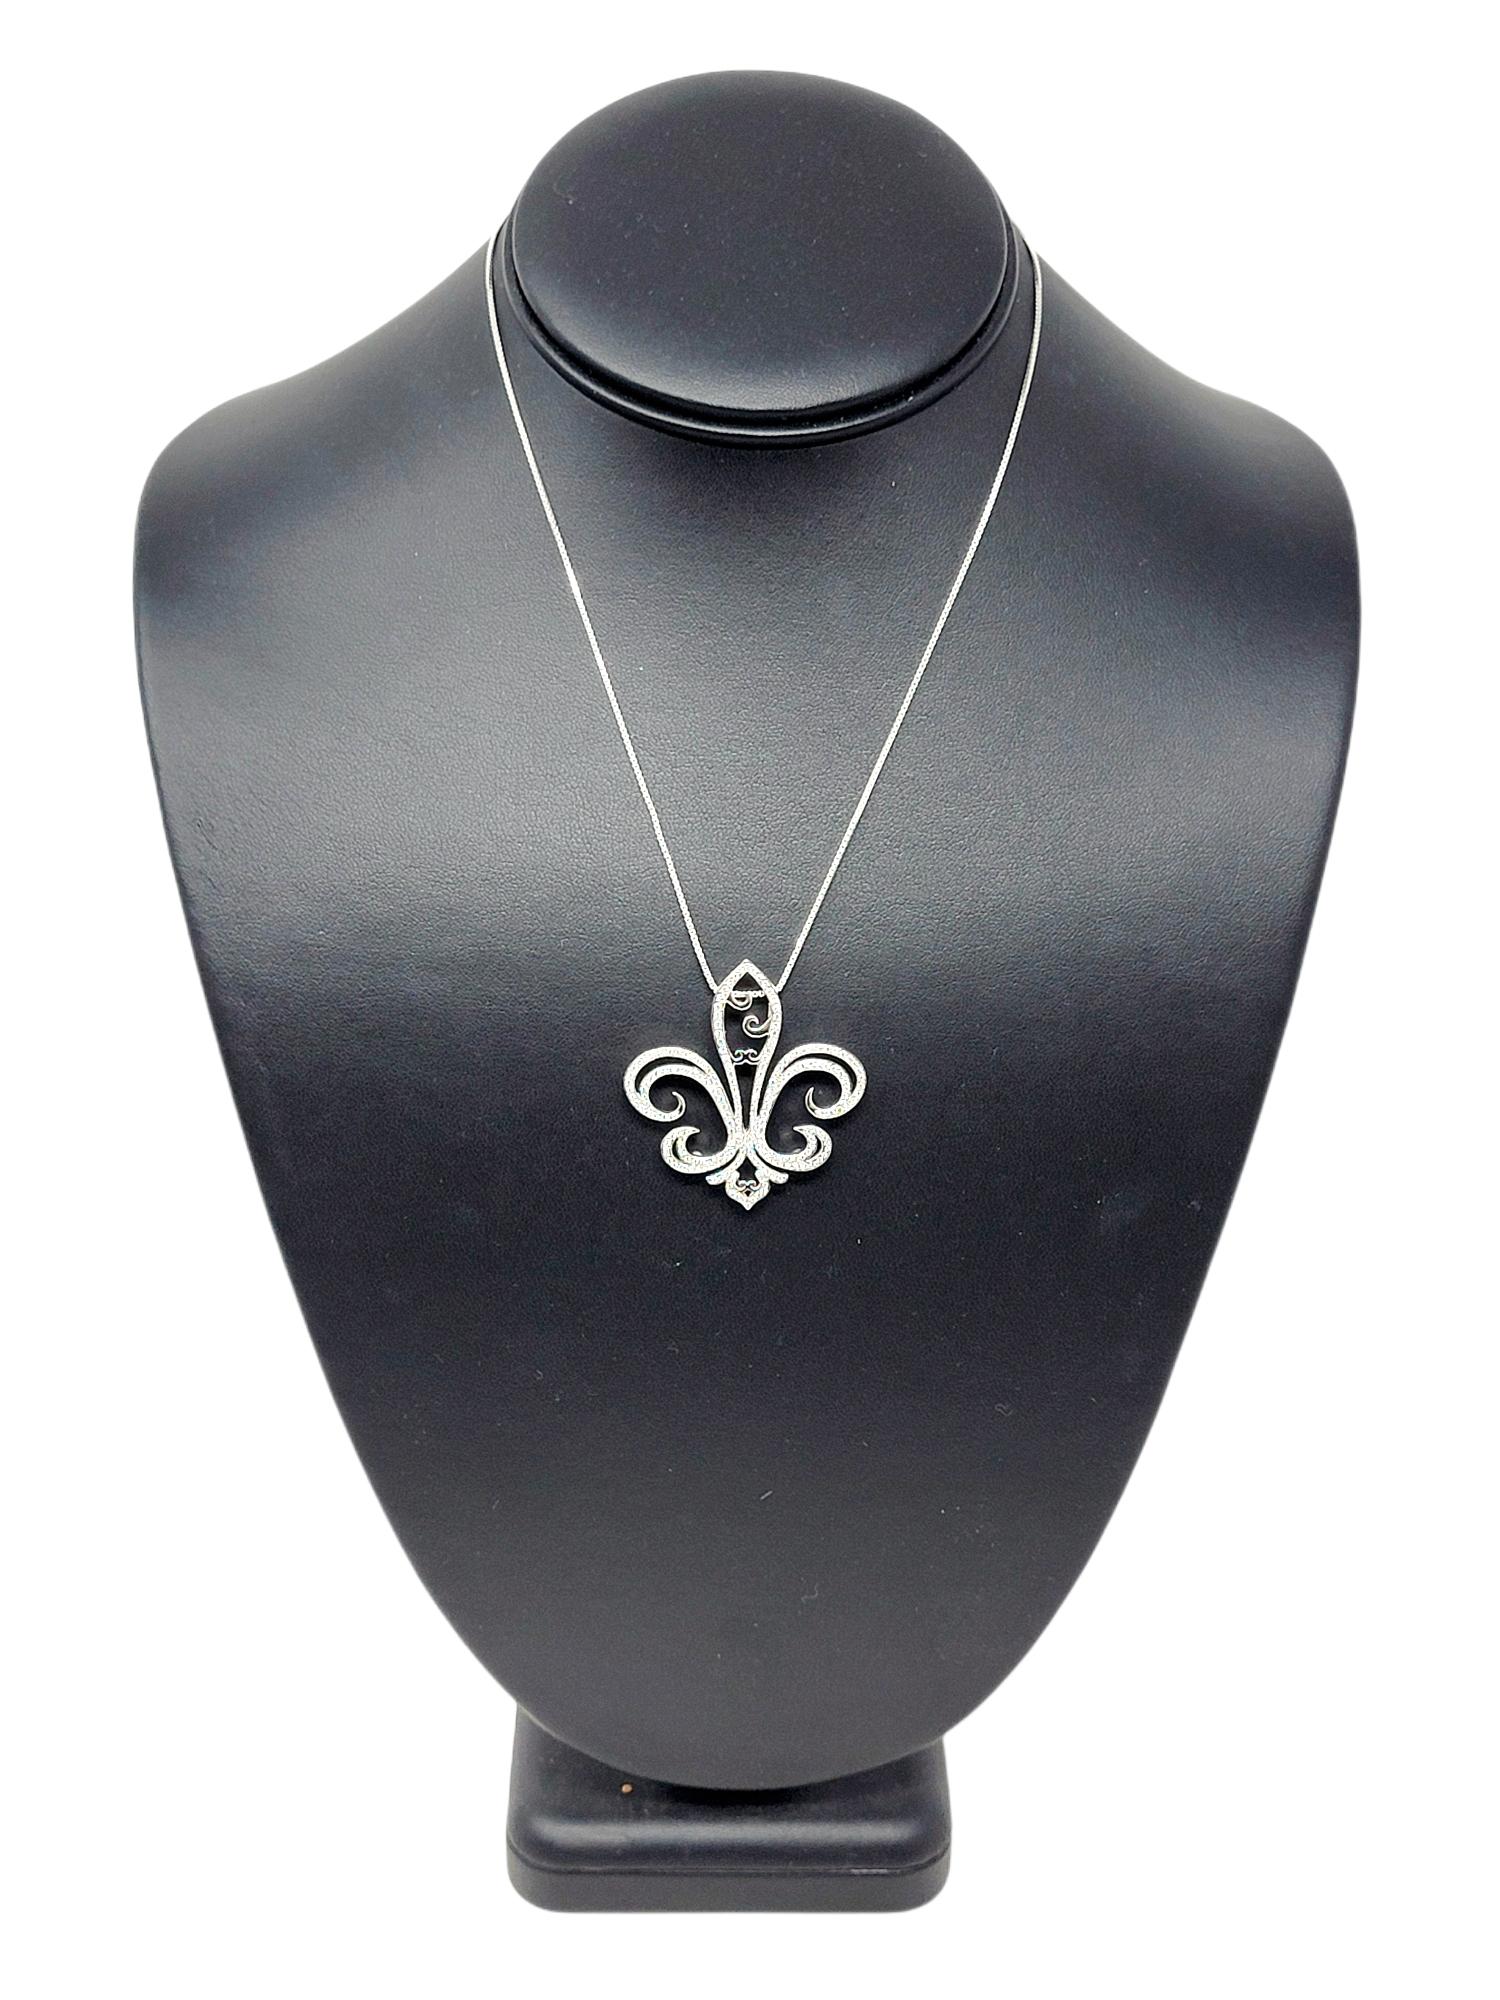 Lovely white gold and pave diamond fleur-de-lis pendant. Featuring delicate features and intricate detail, the pretty piece sparkles beautifully on the neck. 228 round brilliant pave diamonds are set throughout the pendant, offering a brilliant